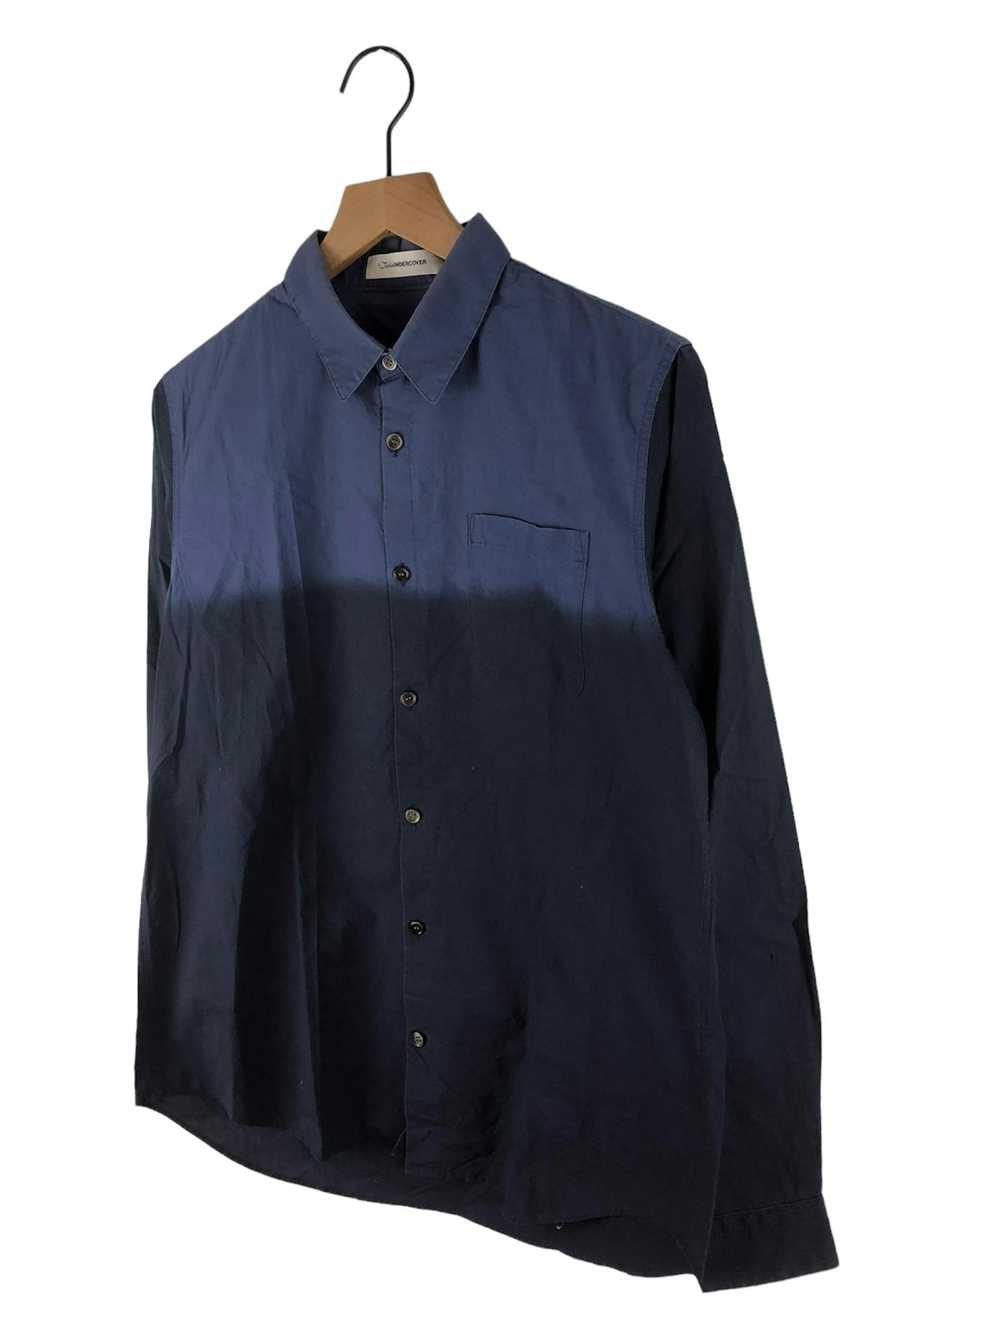 Undercover John Undercover Button Up Shirts - image 2